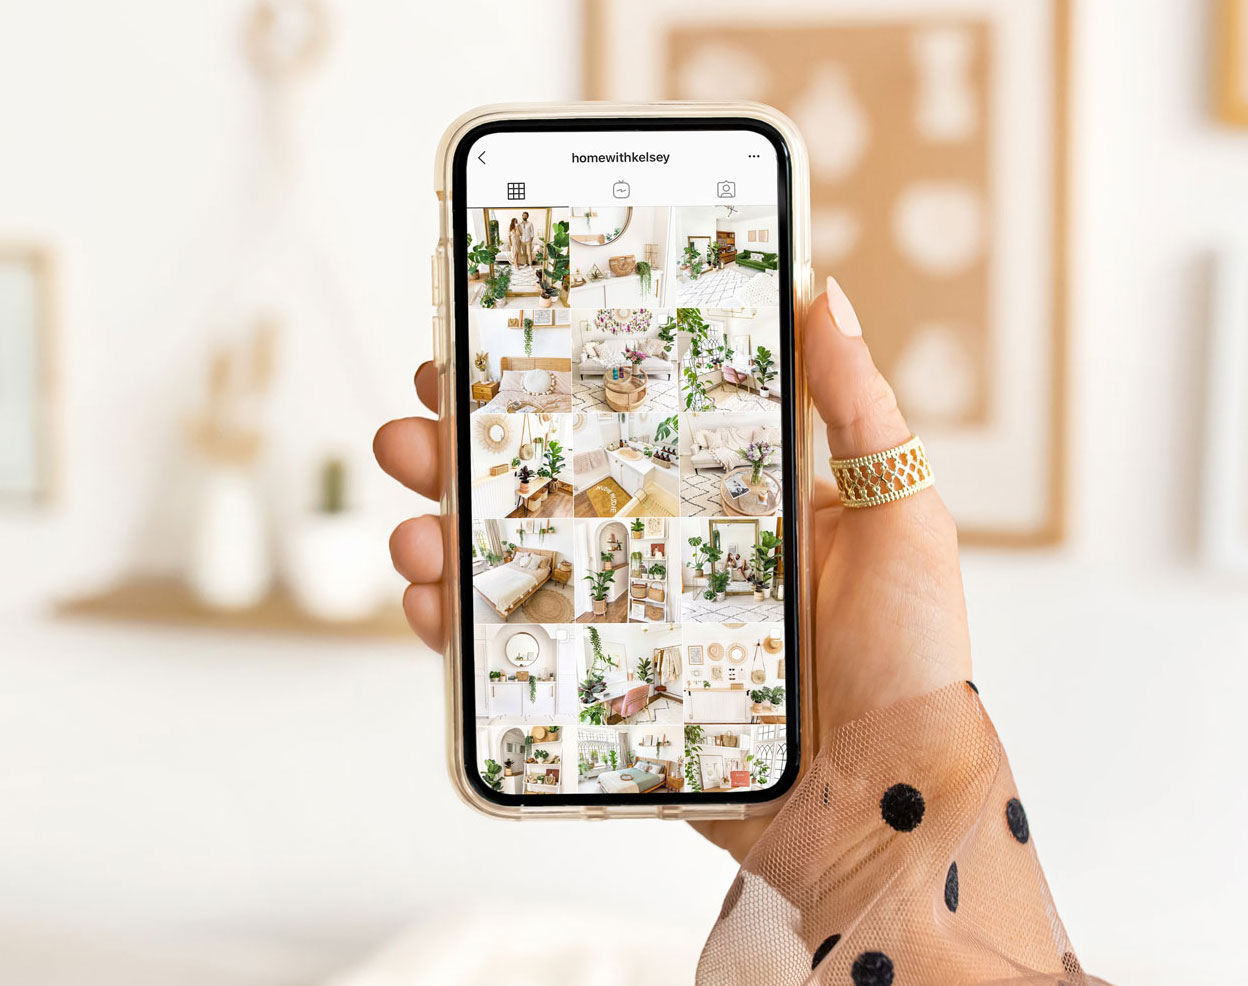 A close-up of a hand holding a smartphone displaying an Instagram profile page. The profile features a grid of aesthetically pleasing interior design photos, showcasing stylish, cozy, and well-decorated rooms with neutral tones and greenery. The person holding the phone is wearing a gold ring and has a light peach nail polish. The background is softly blurred, featuring a bright, minimalist room with subtle decor elements that complement the theme of the Instagram feed. The overall image conveys a sense of modern elegance and tasteful design.






